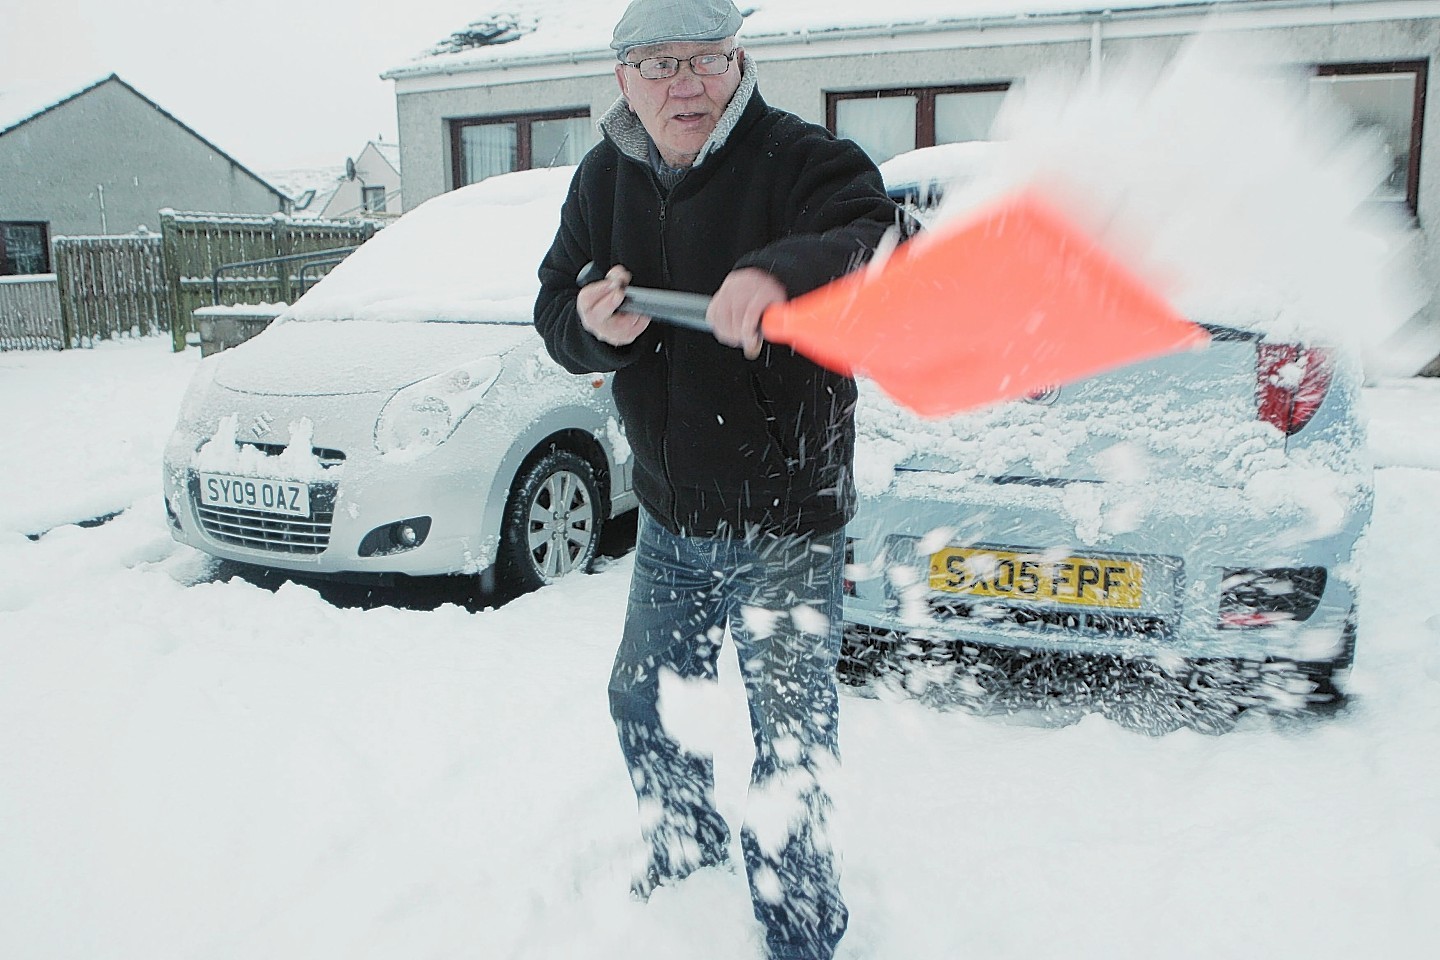 Residents have taken to the streets to try to clear the snow in Muir of Ord